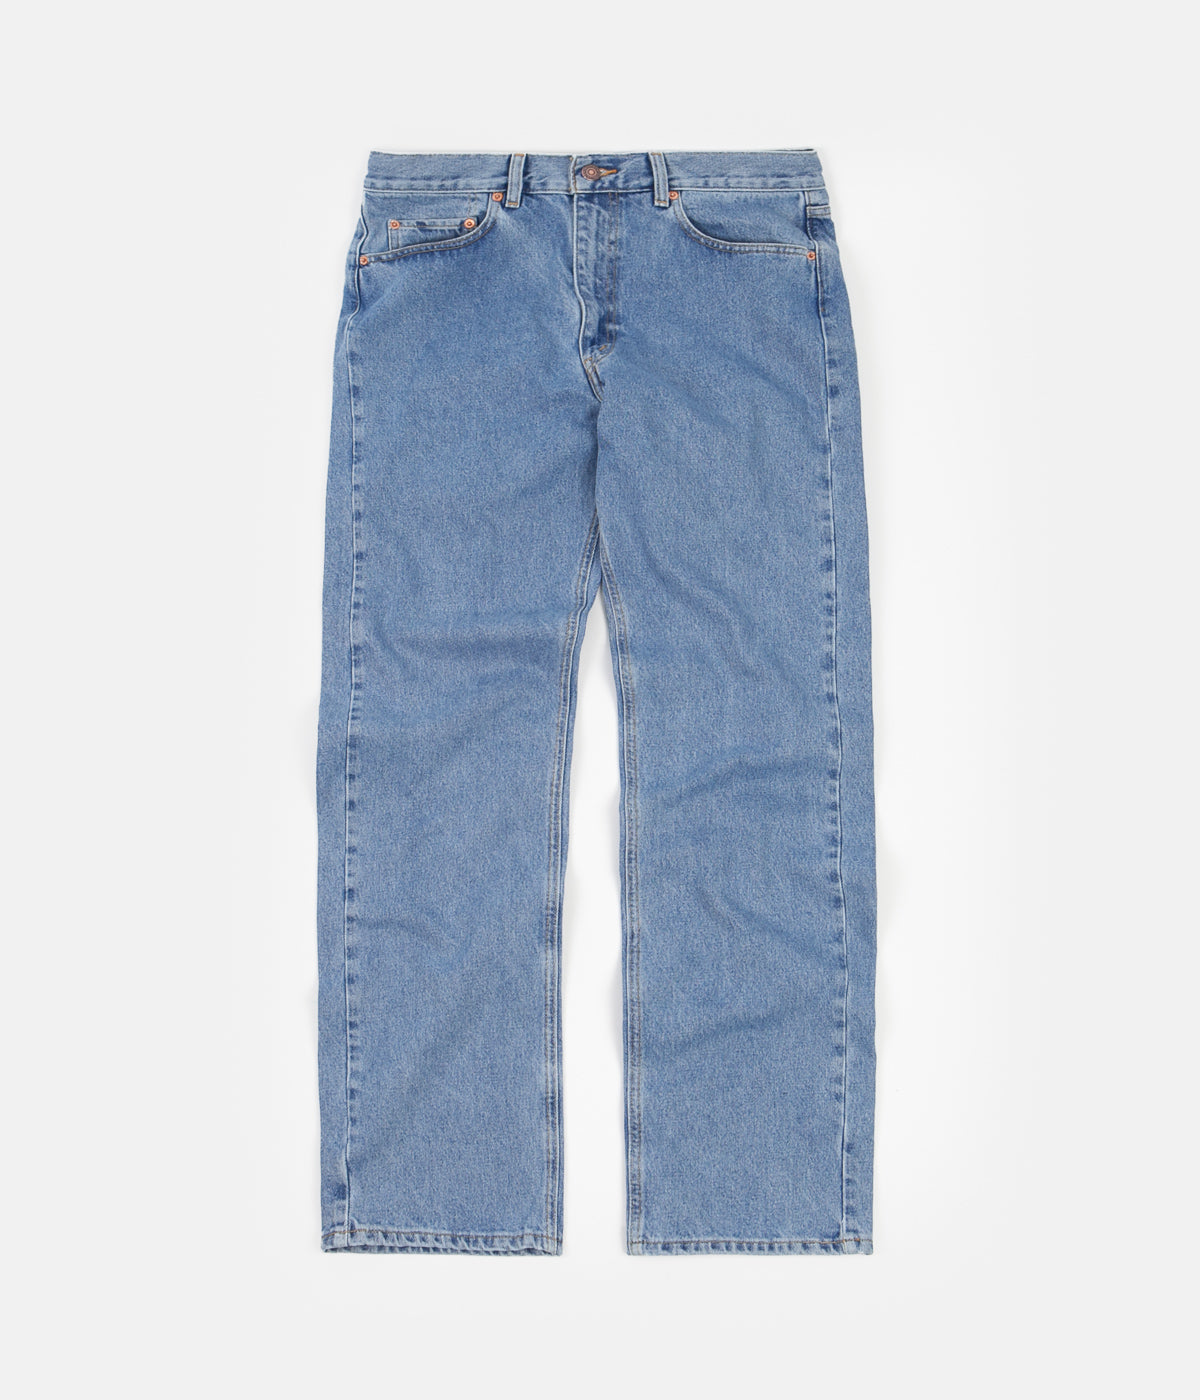 LEVIS VINTAGE CLOTHING 554 RELAXE 新品未使用